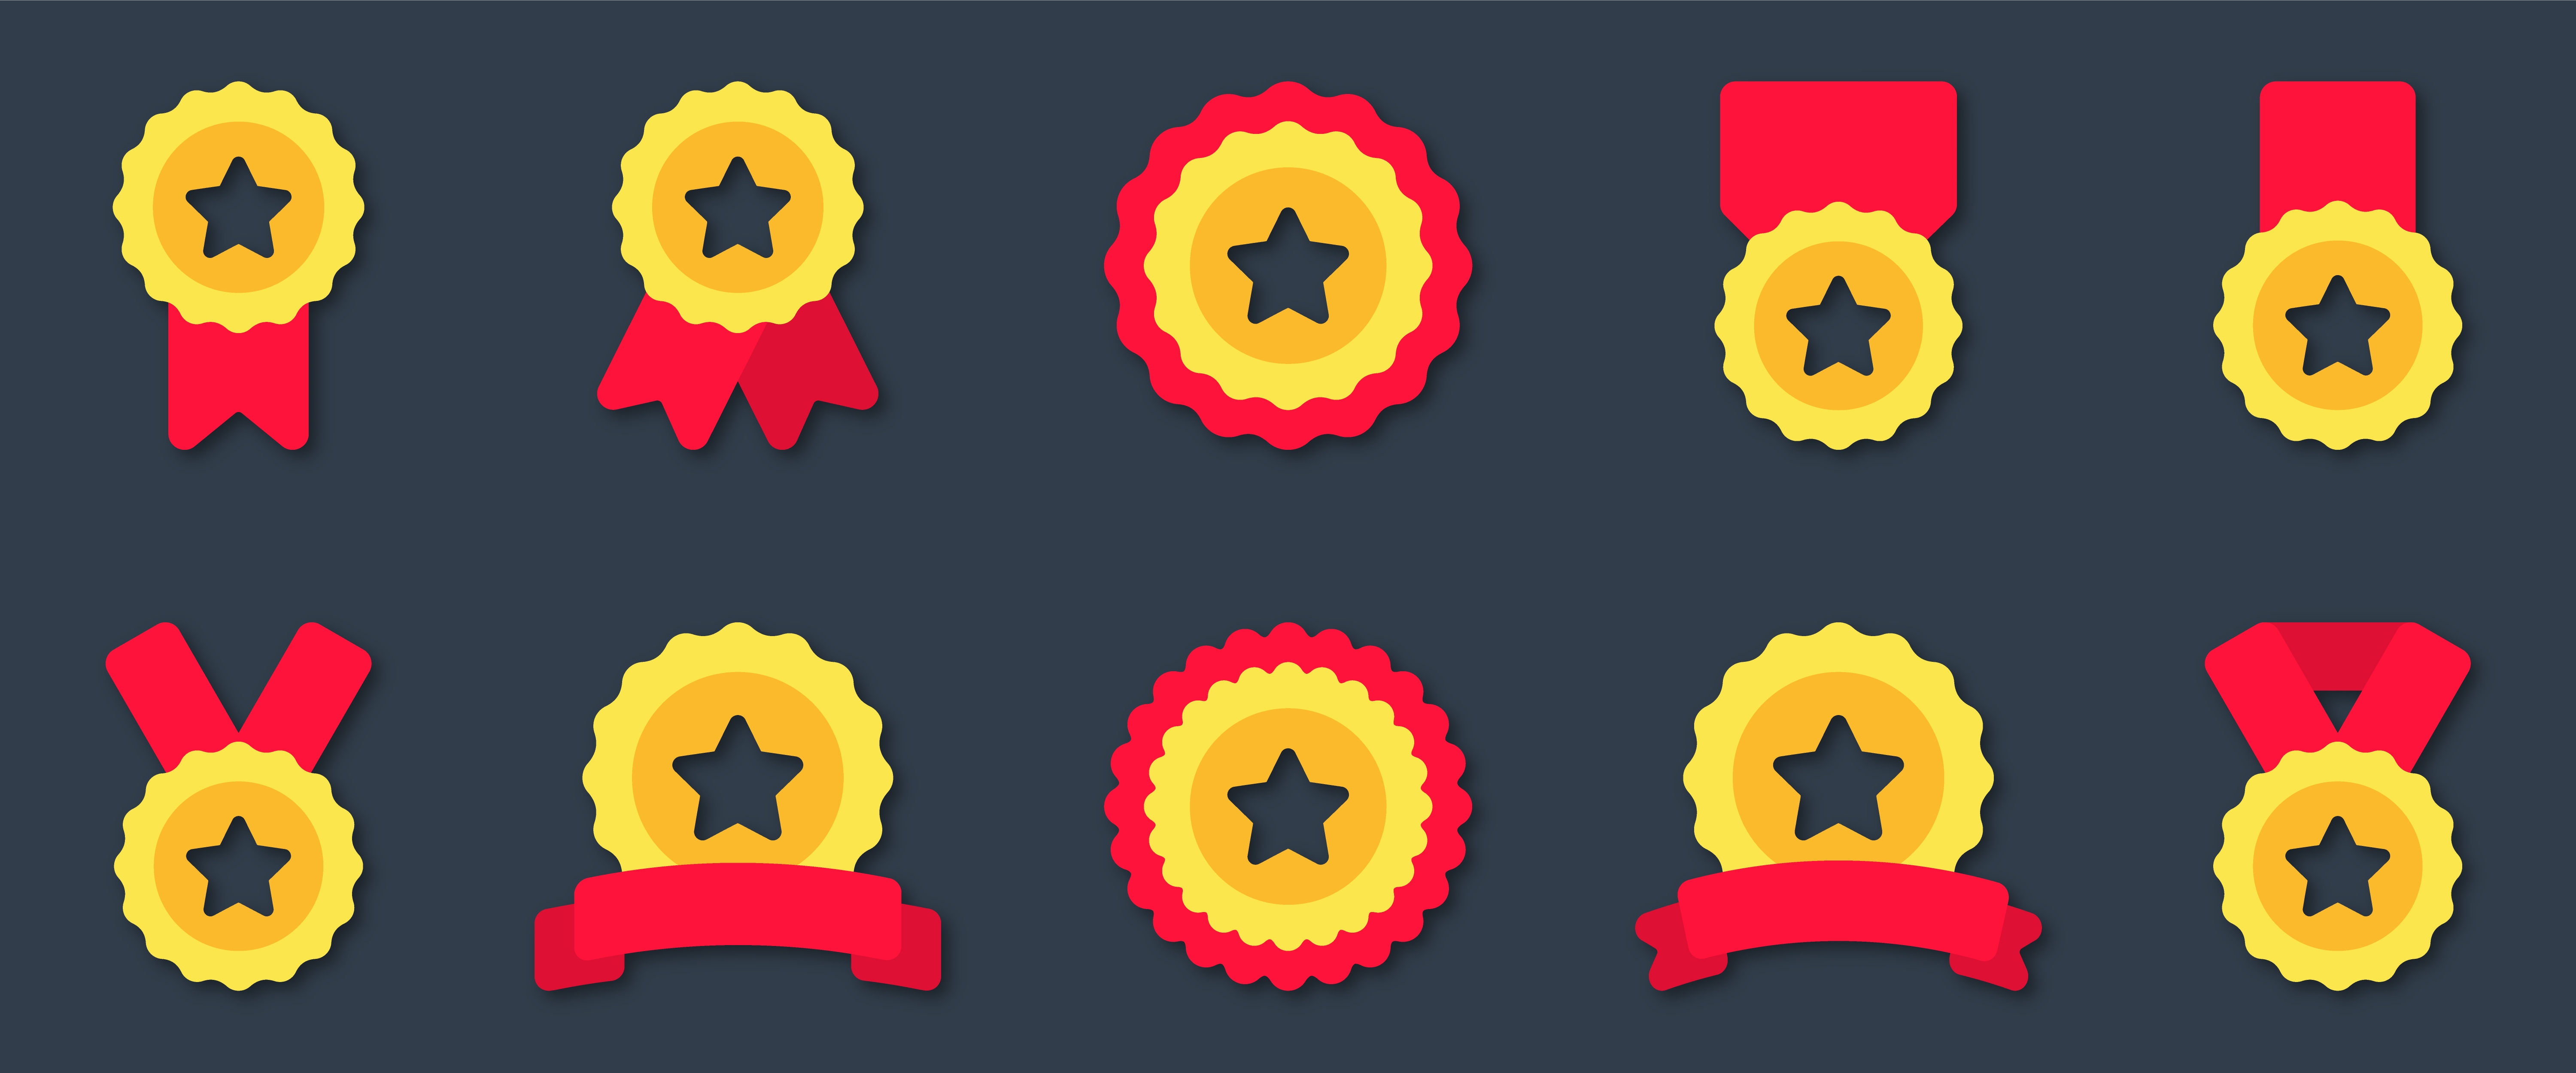 Gold Medals with Red Ribbon Stars